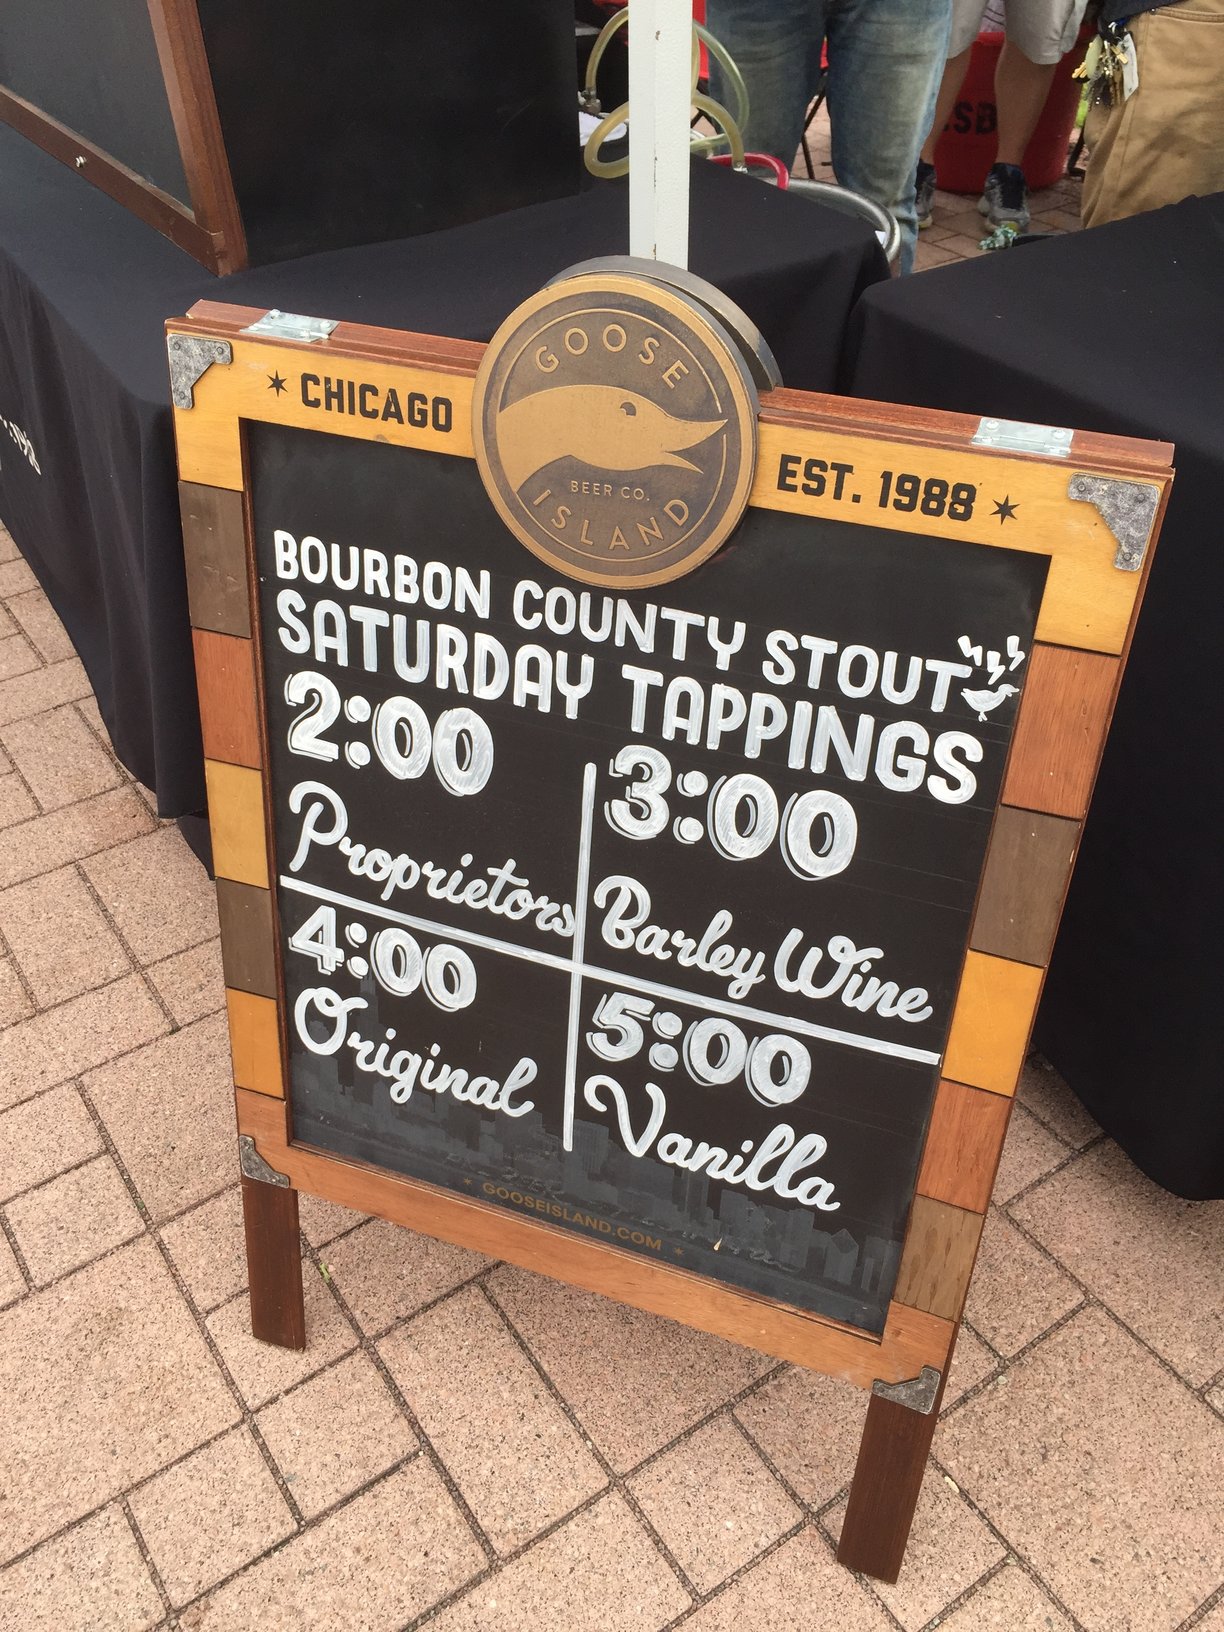 Goose Island brought some pretty good beers to the 2015 Chicago Ale Fest.